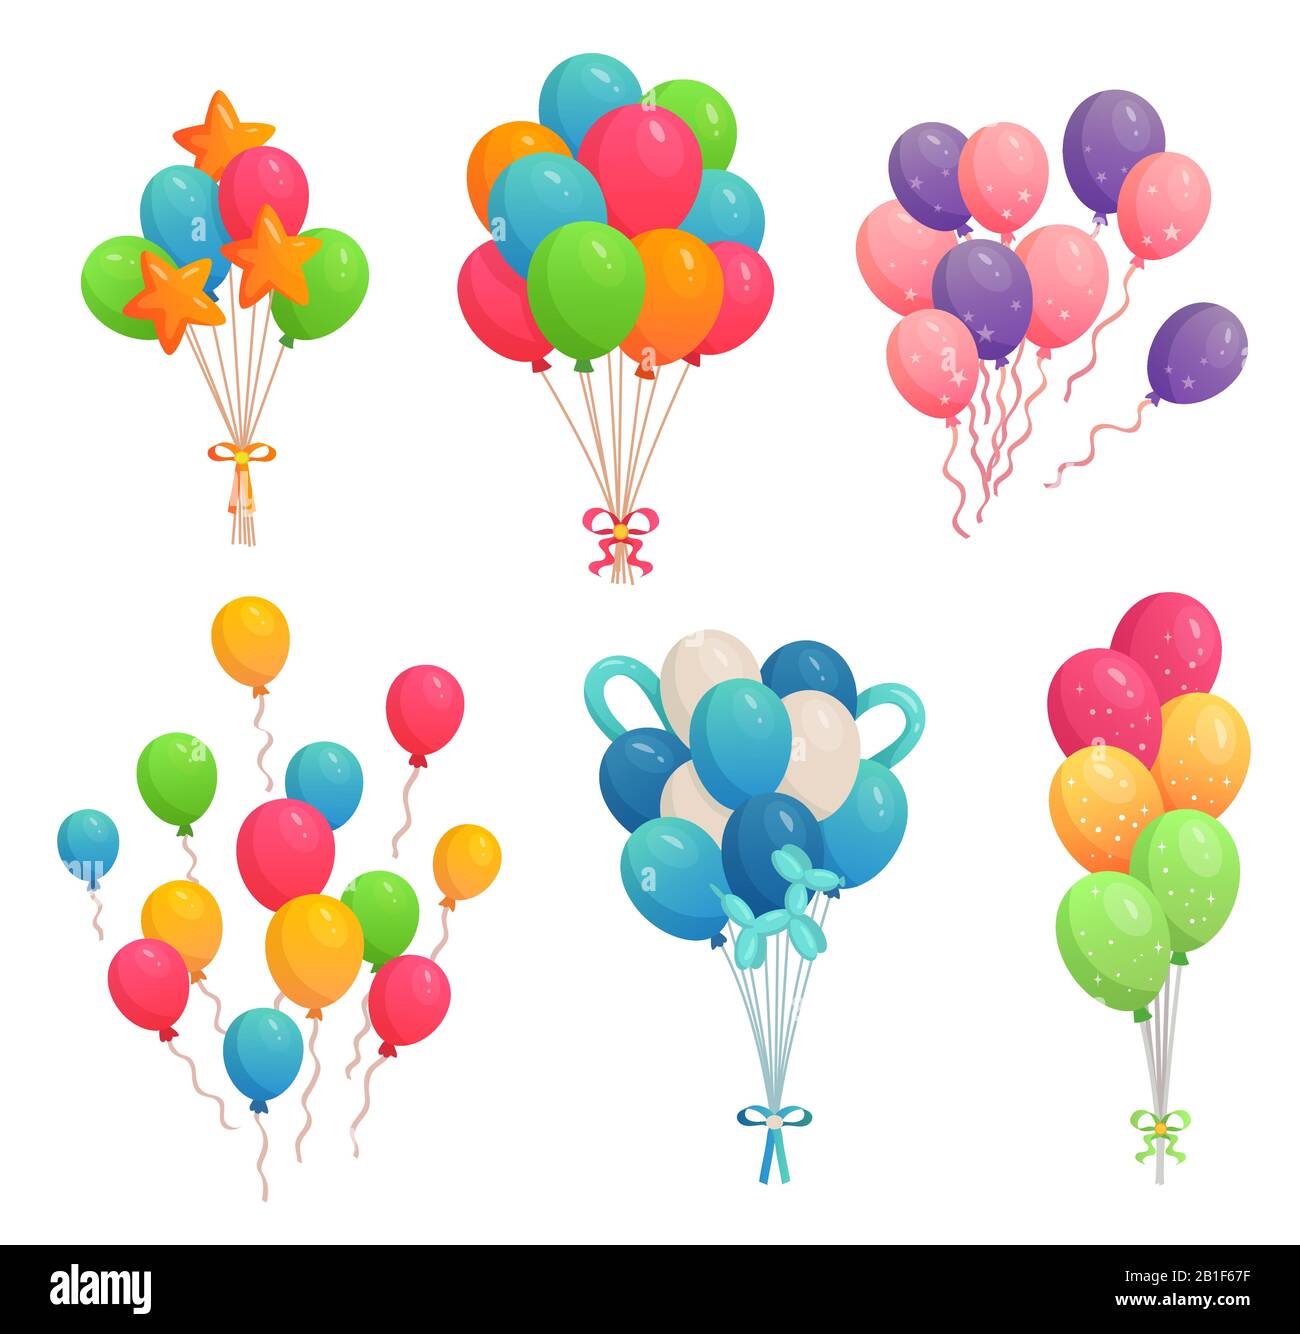 Detail Images Of Balloons Nomer 34